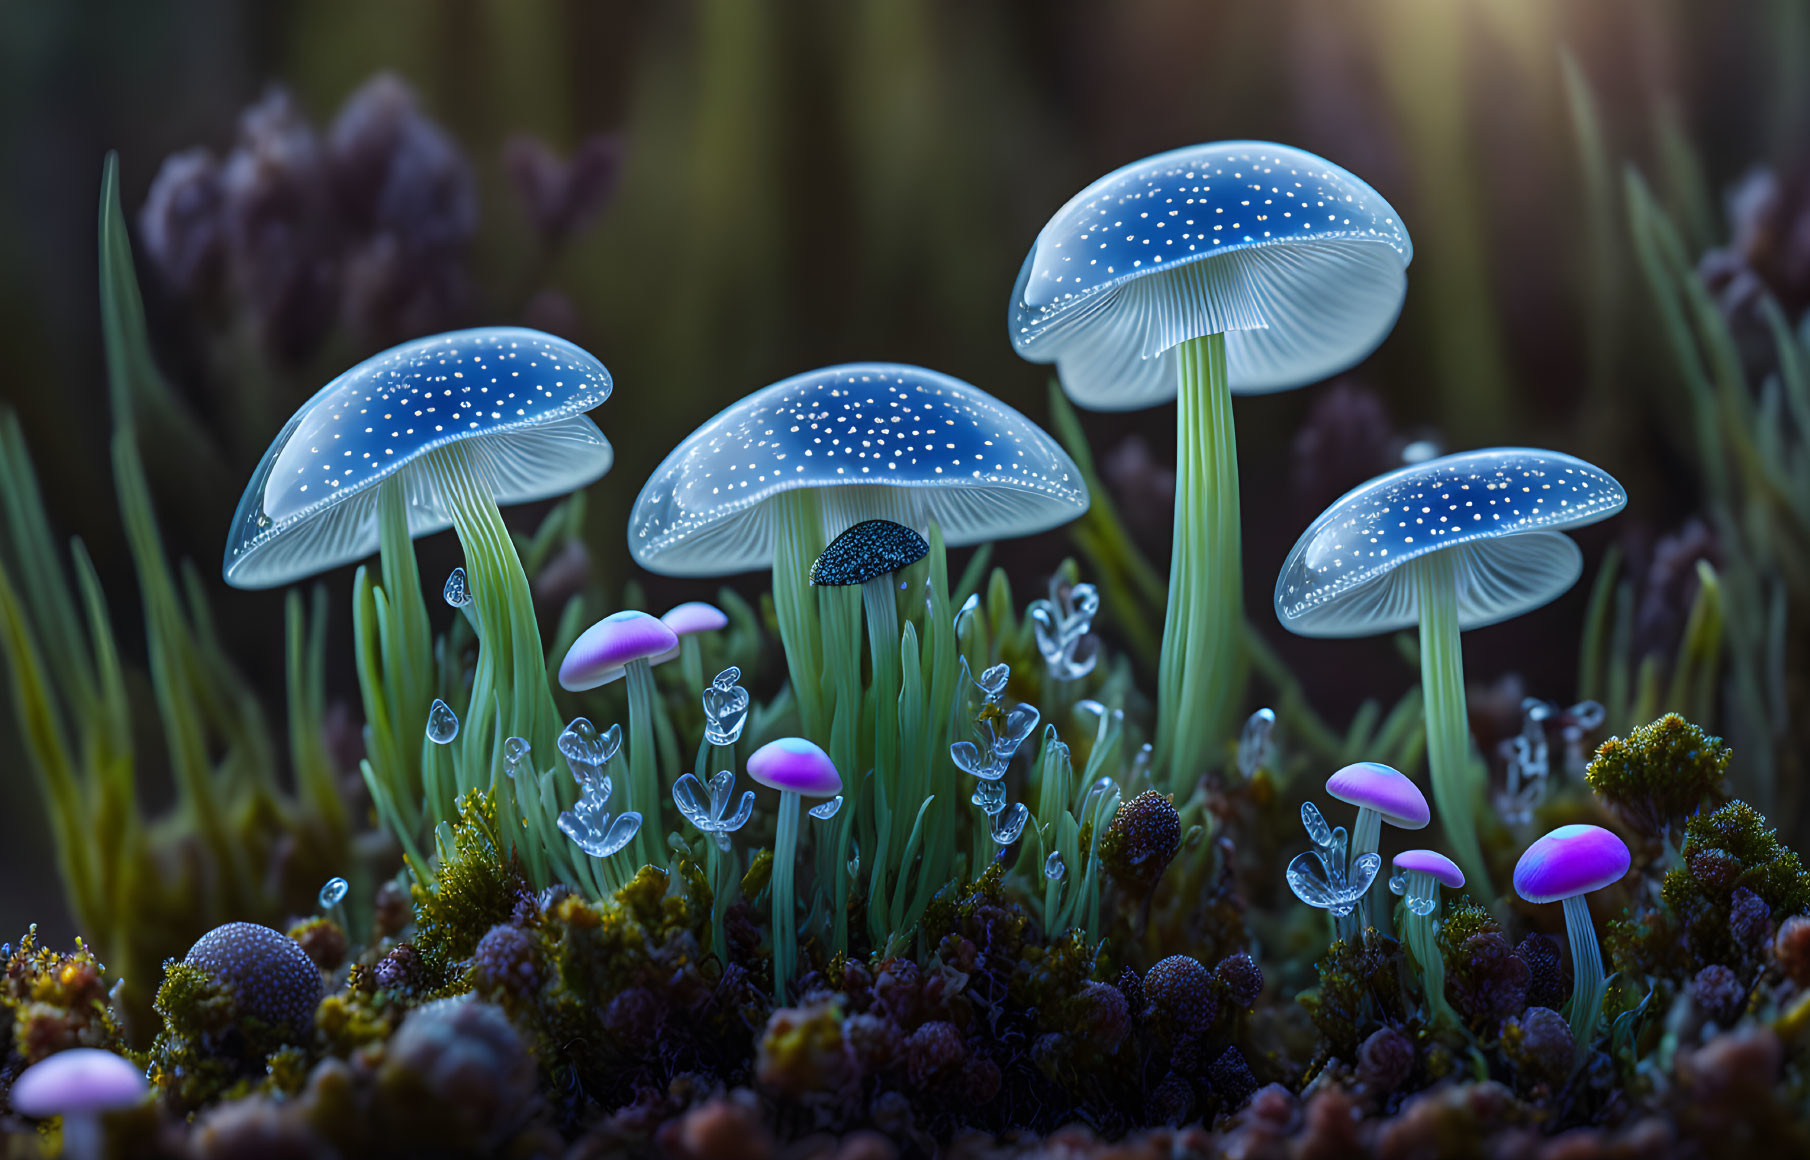 Enchanting twilight forest with bioluminescent mushrooms and glowing plants